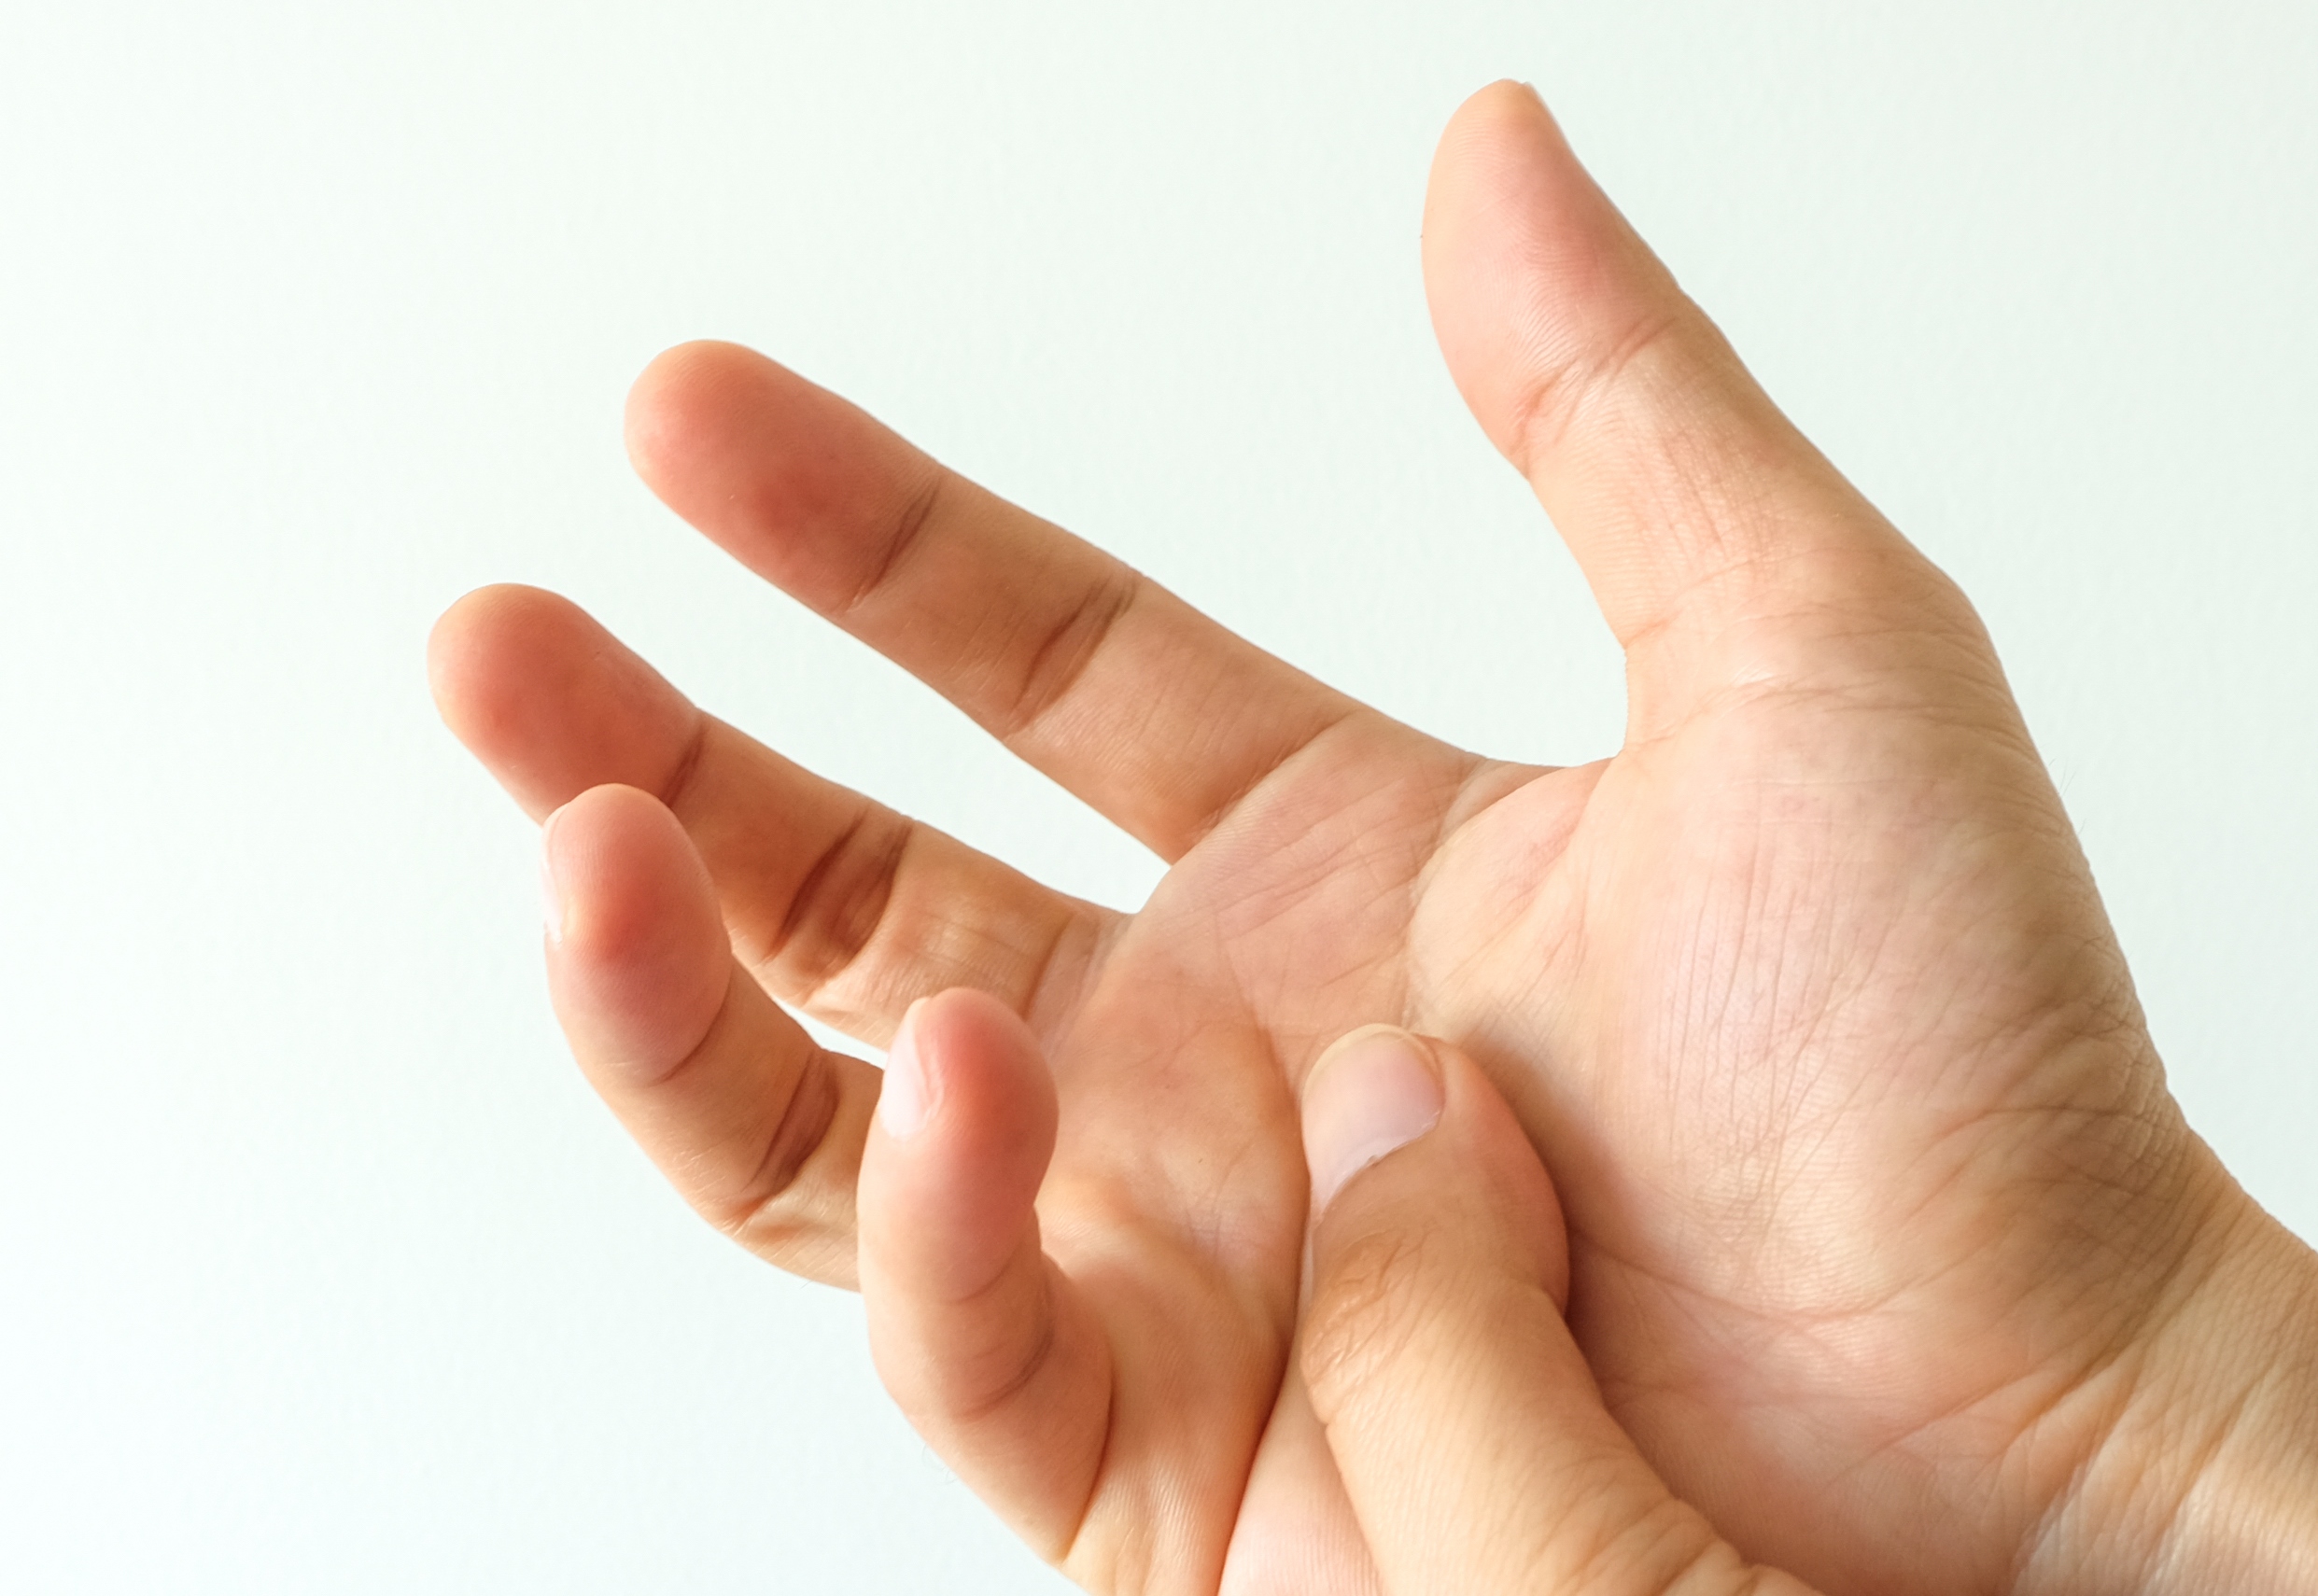 Can Tingly Numb Fingers Be Caused by Heart Trouble?